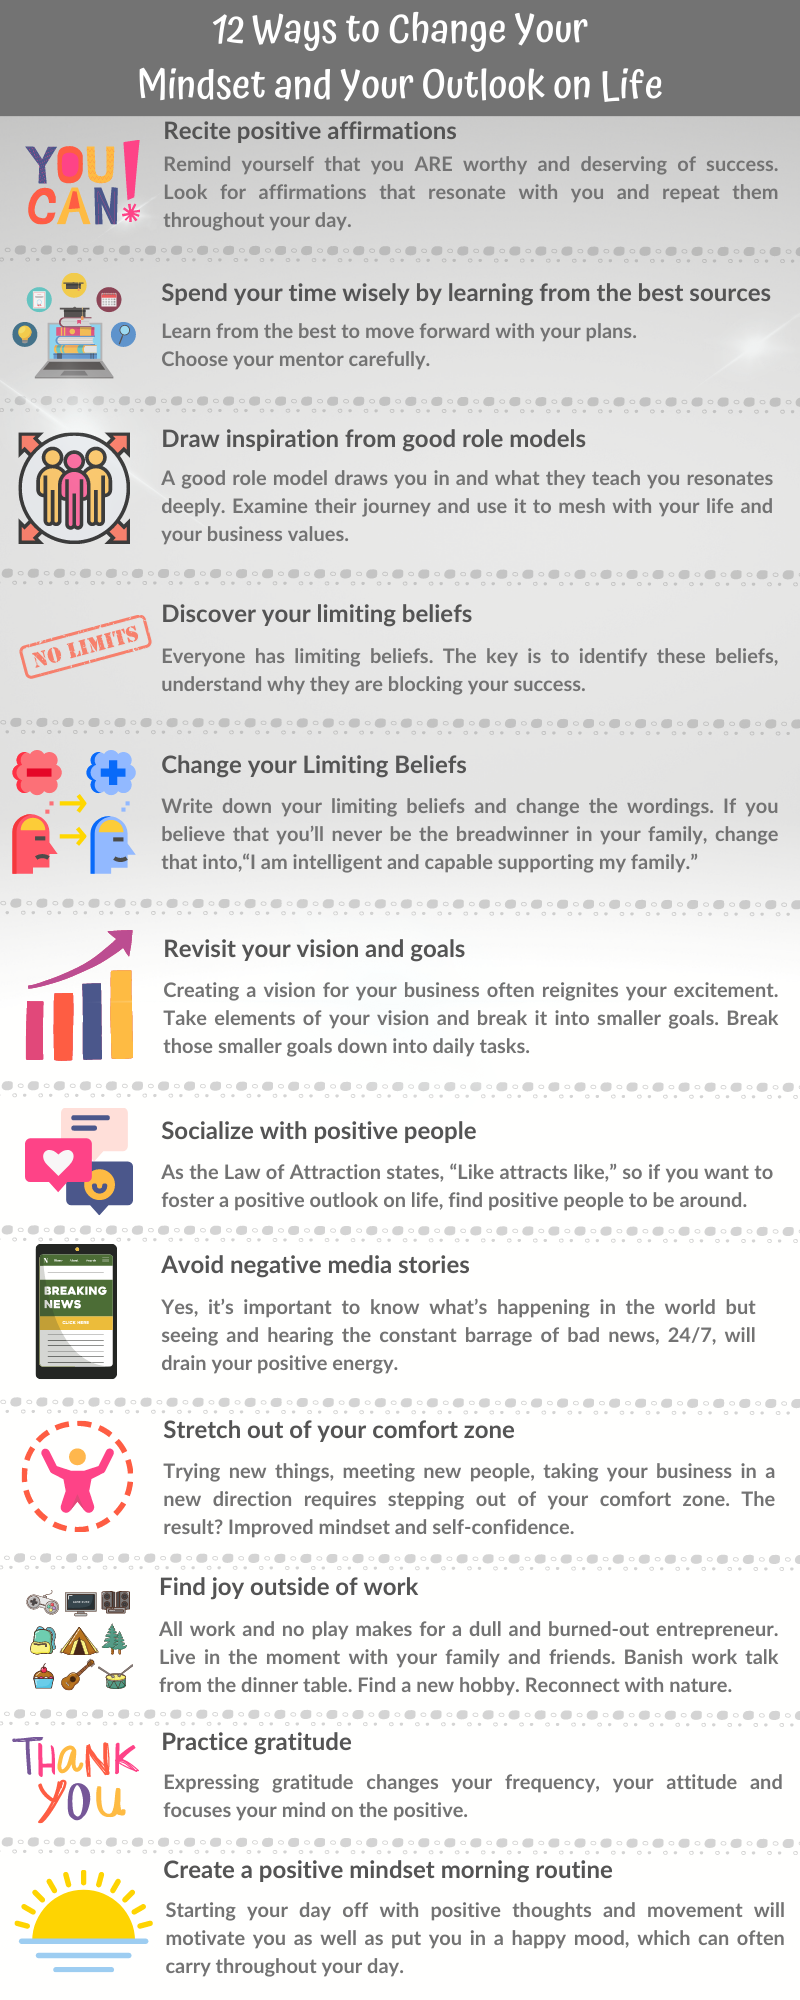 12 Ways to Change Your Mindset and Your Outlook on Life infographic 